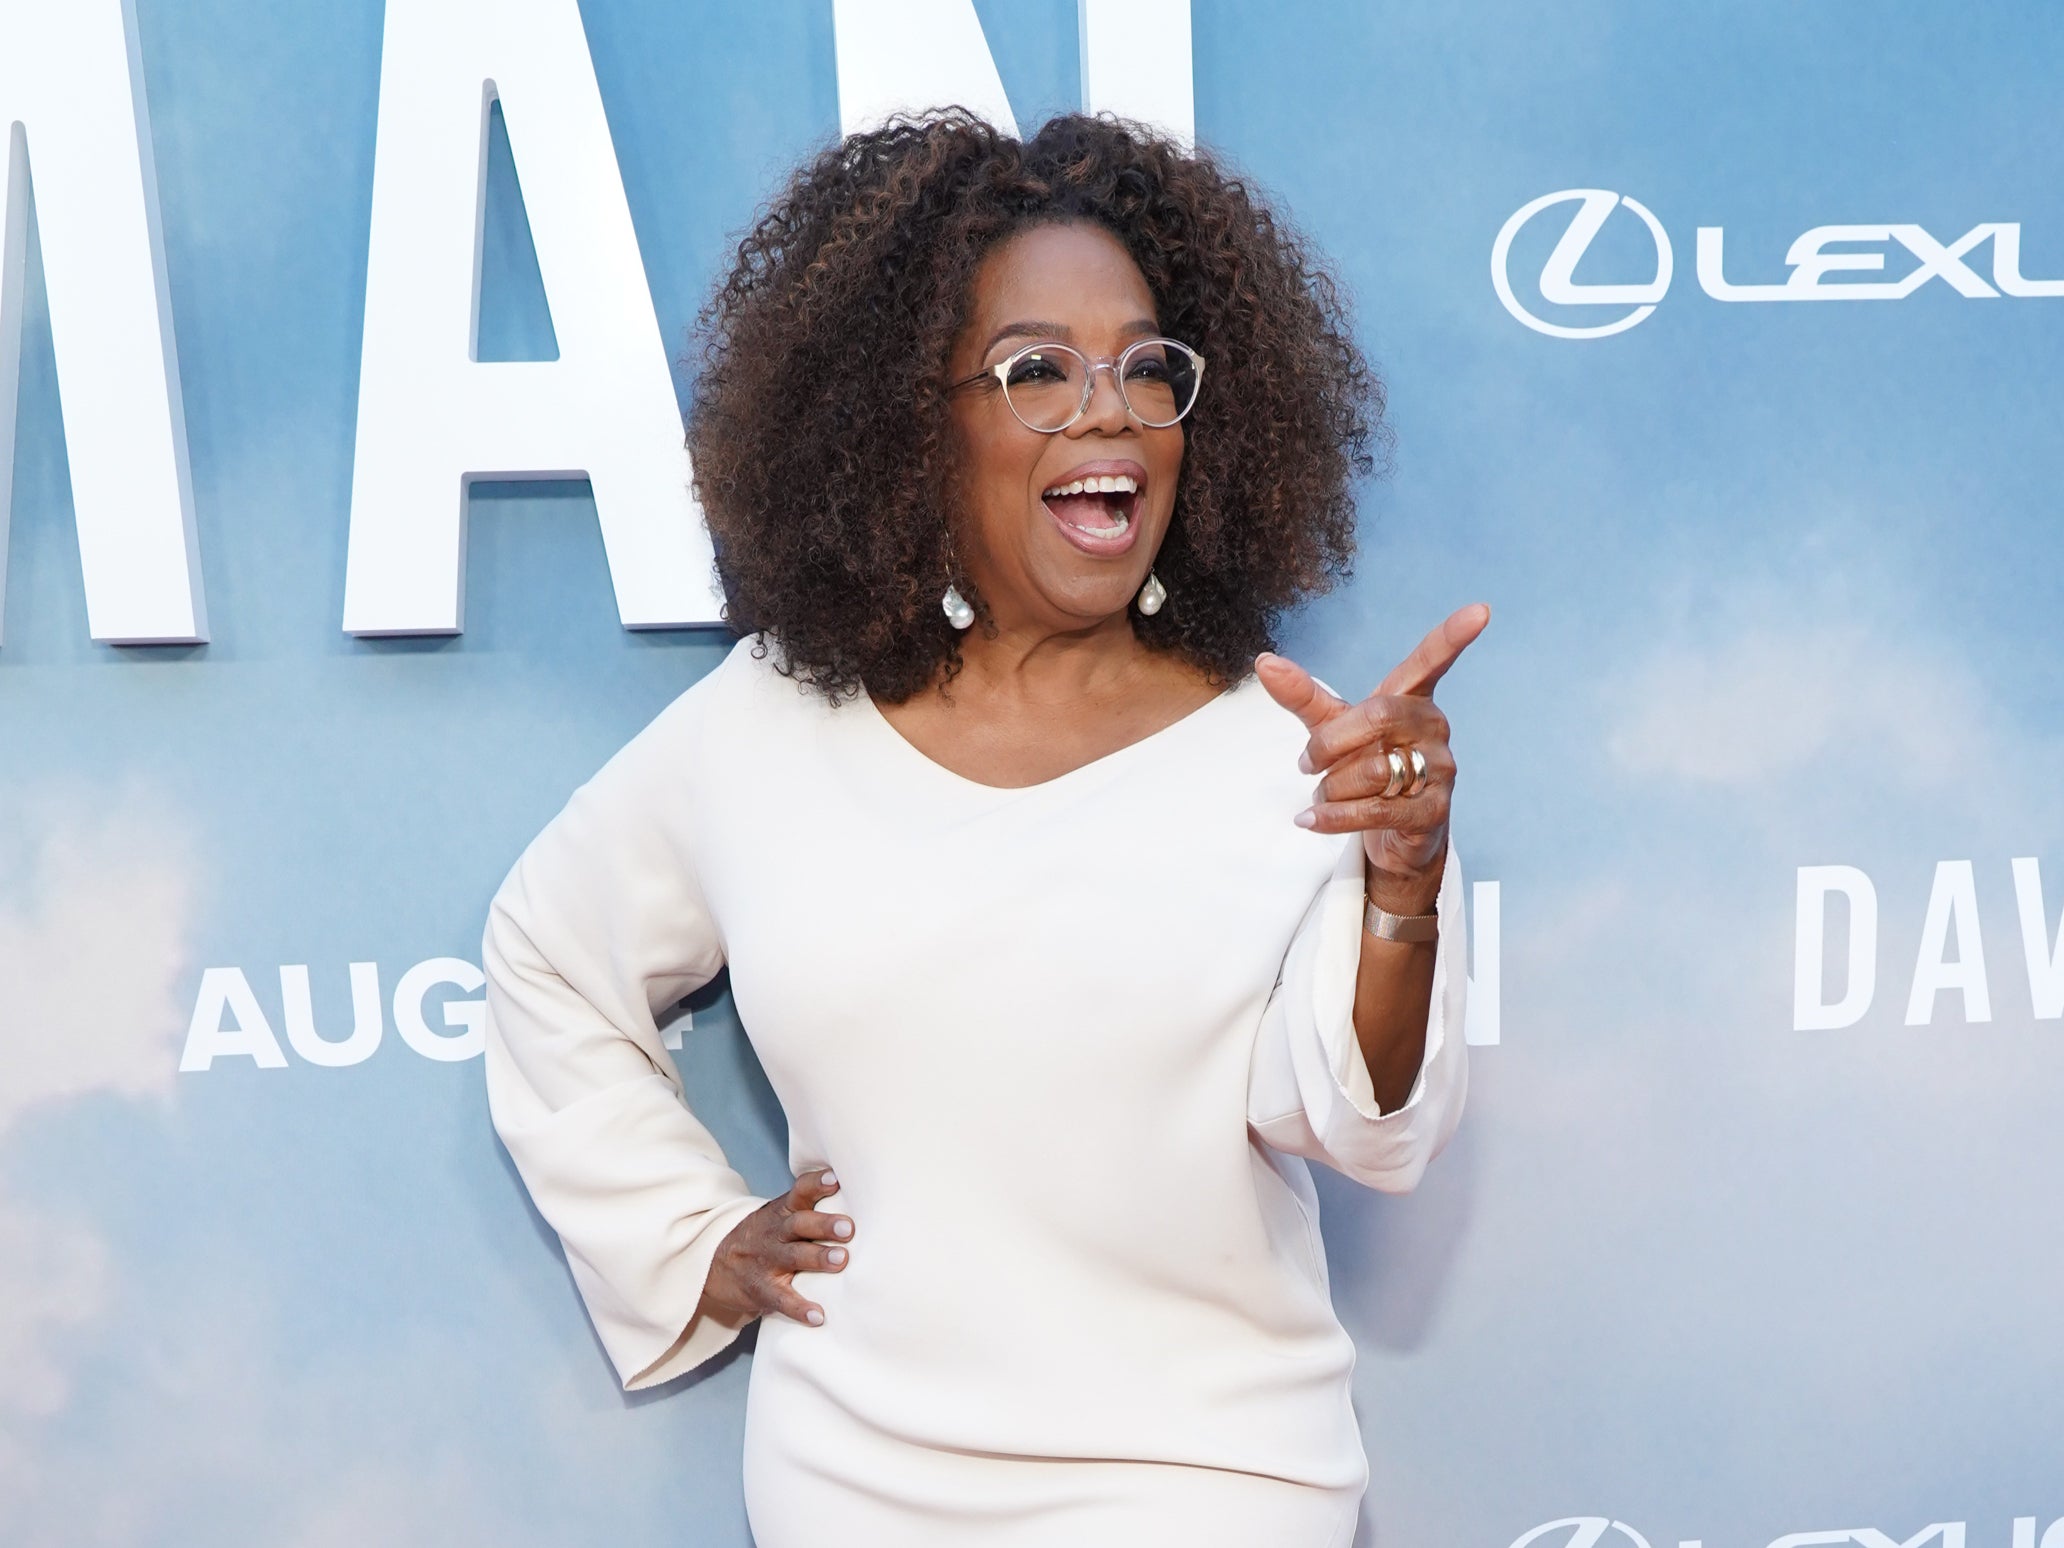 Oprah is a user of the exclusive new social media app